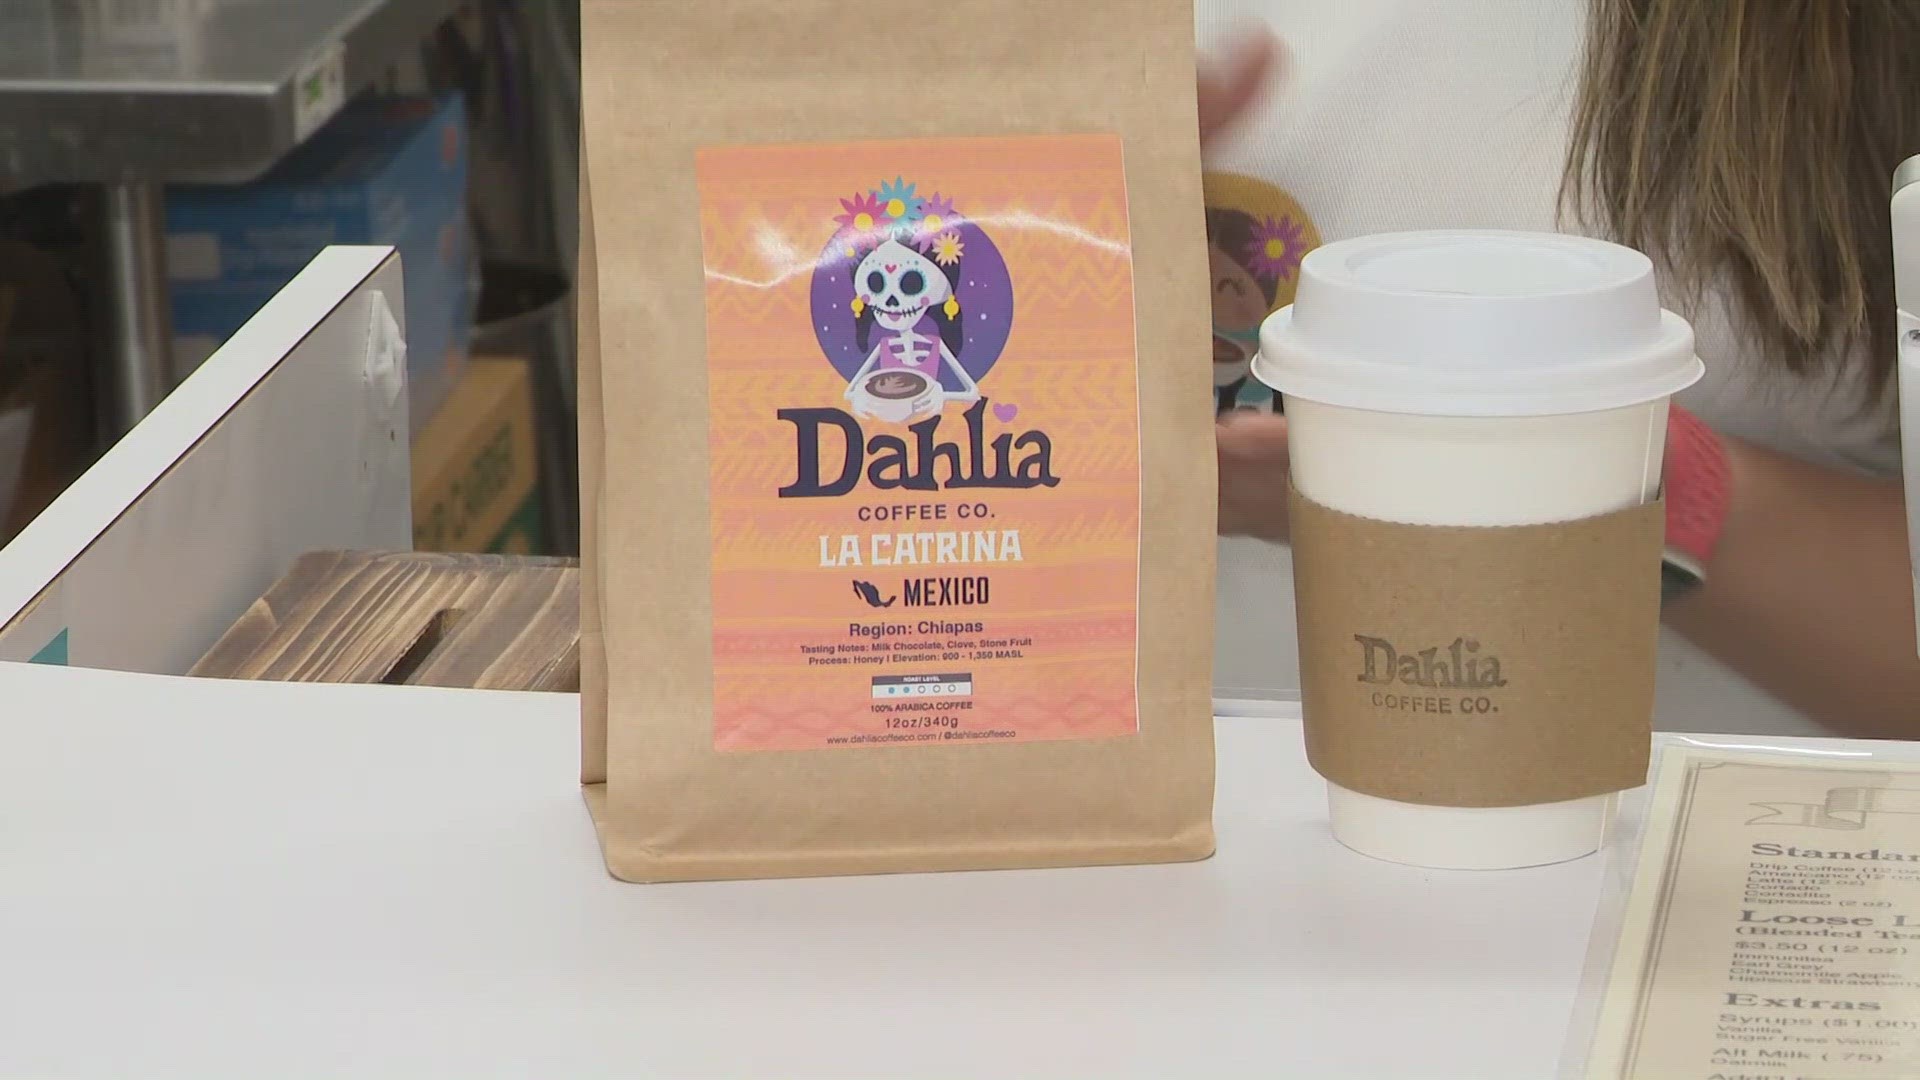 Do you love coffee? There's a new spot for that as 3News' Kierra Cotton explores the Dahlia Coffee Co. in Cleveland.